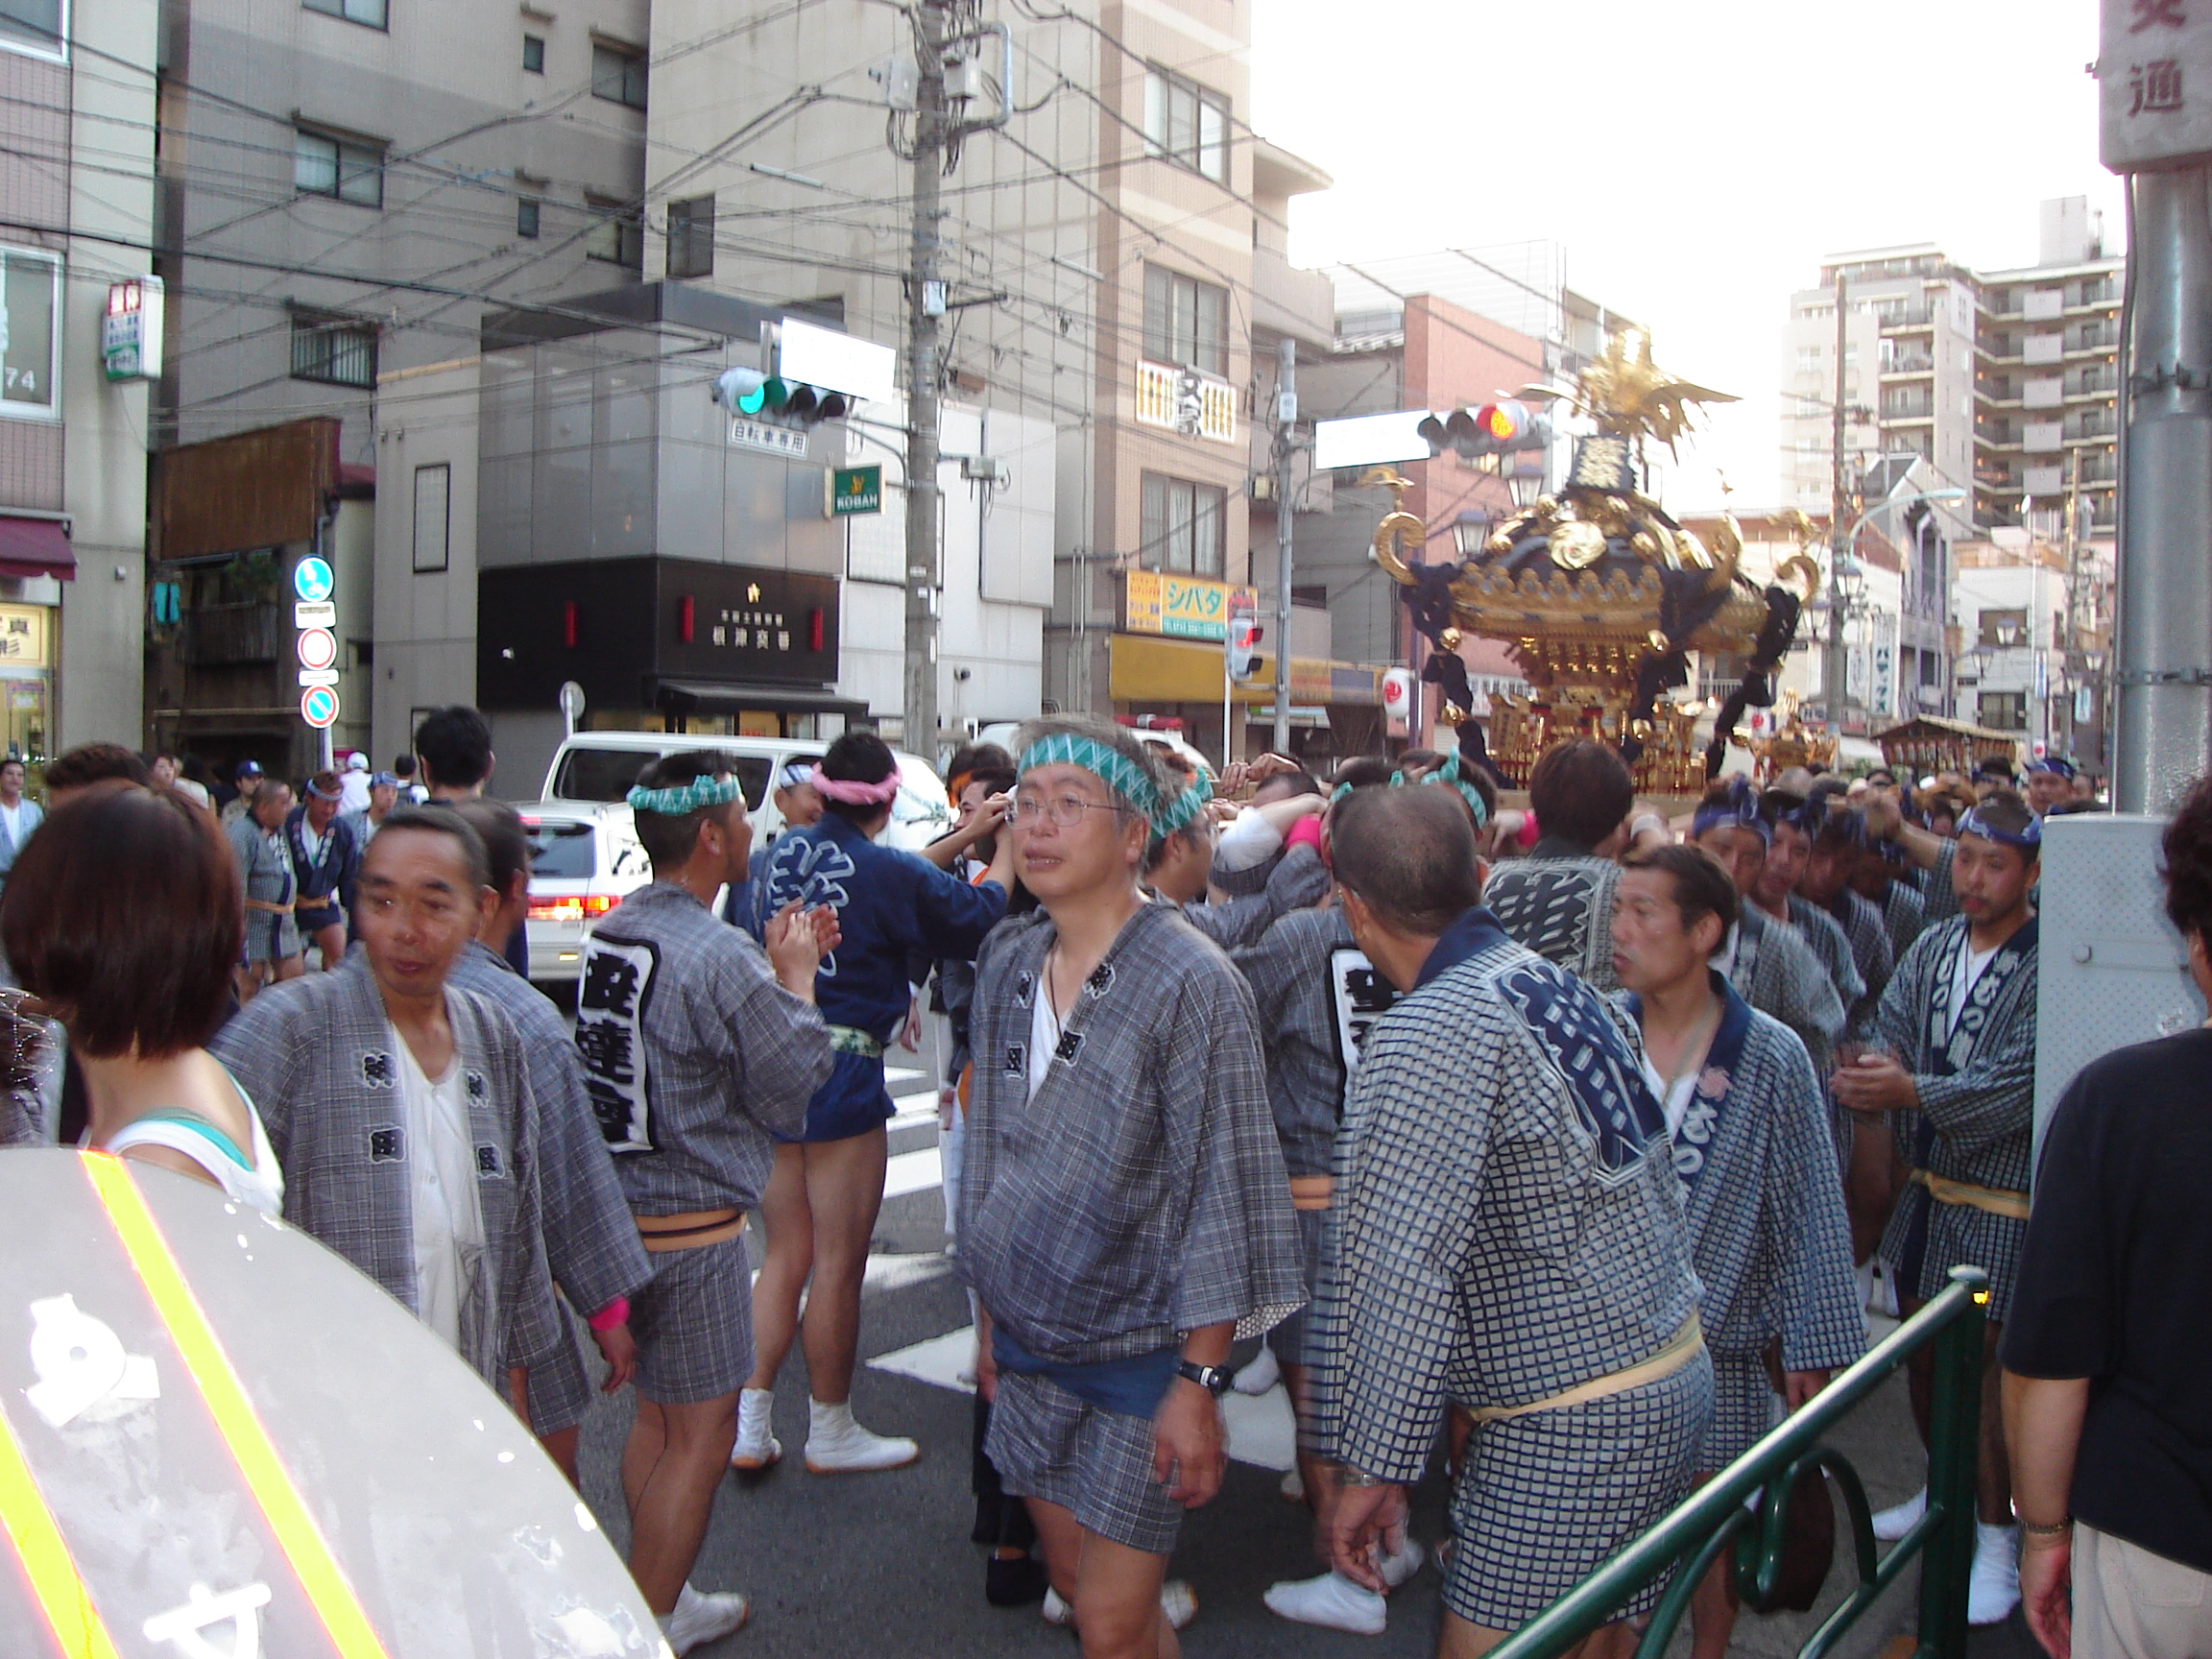 the procession continues along the side of the street